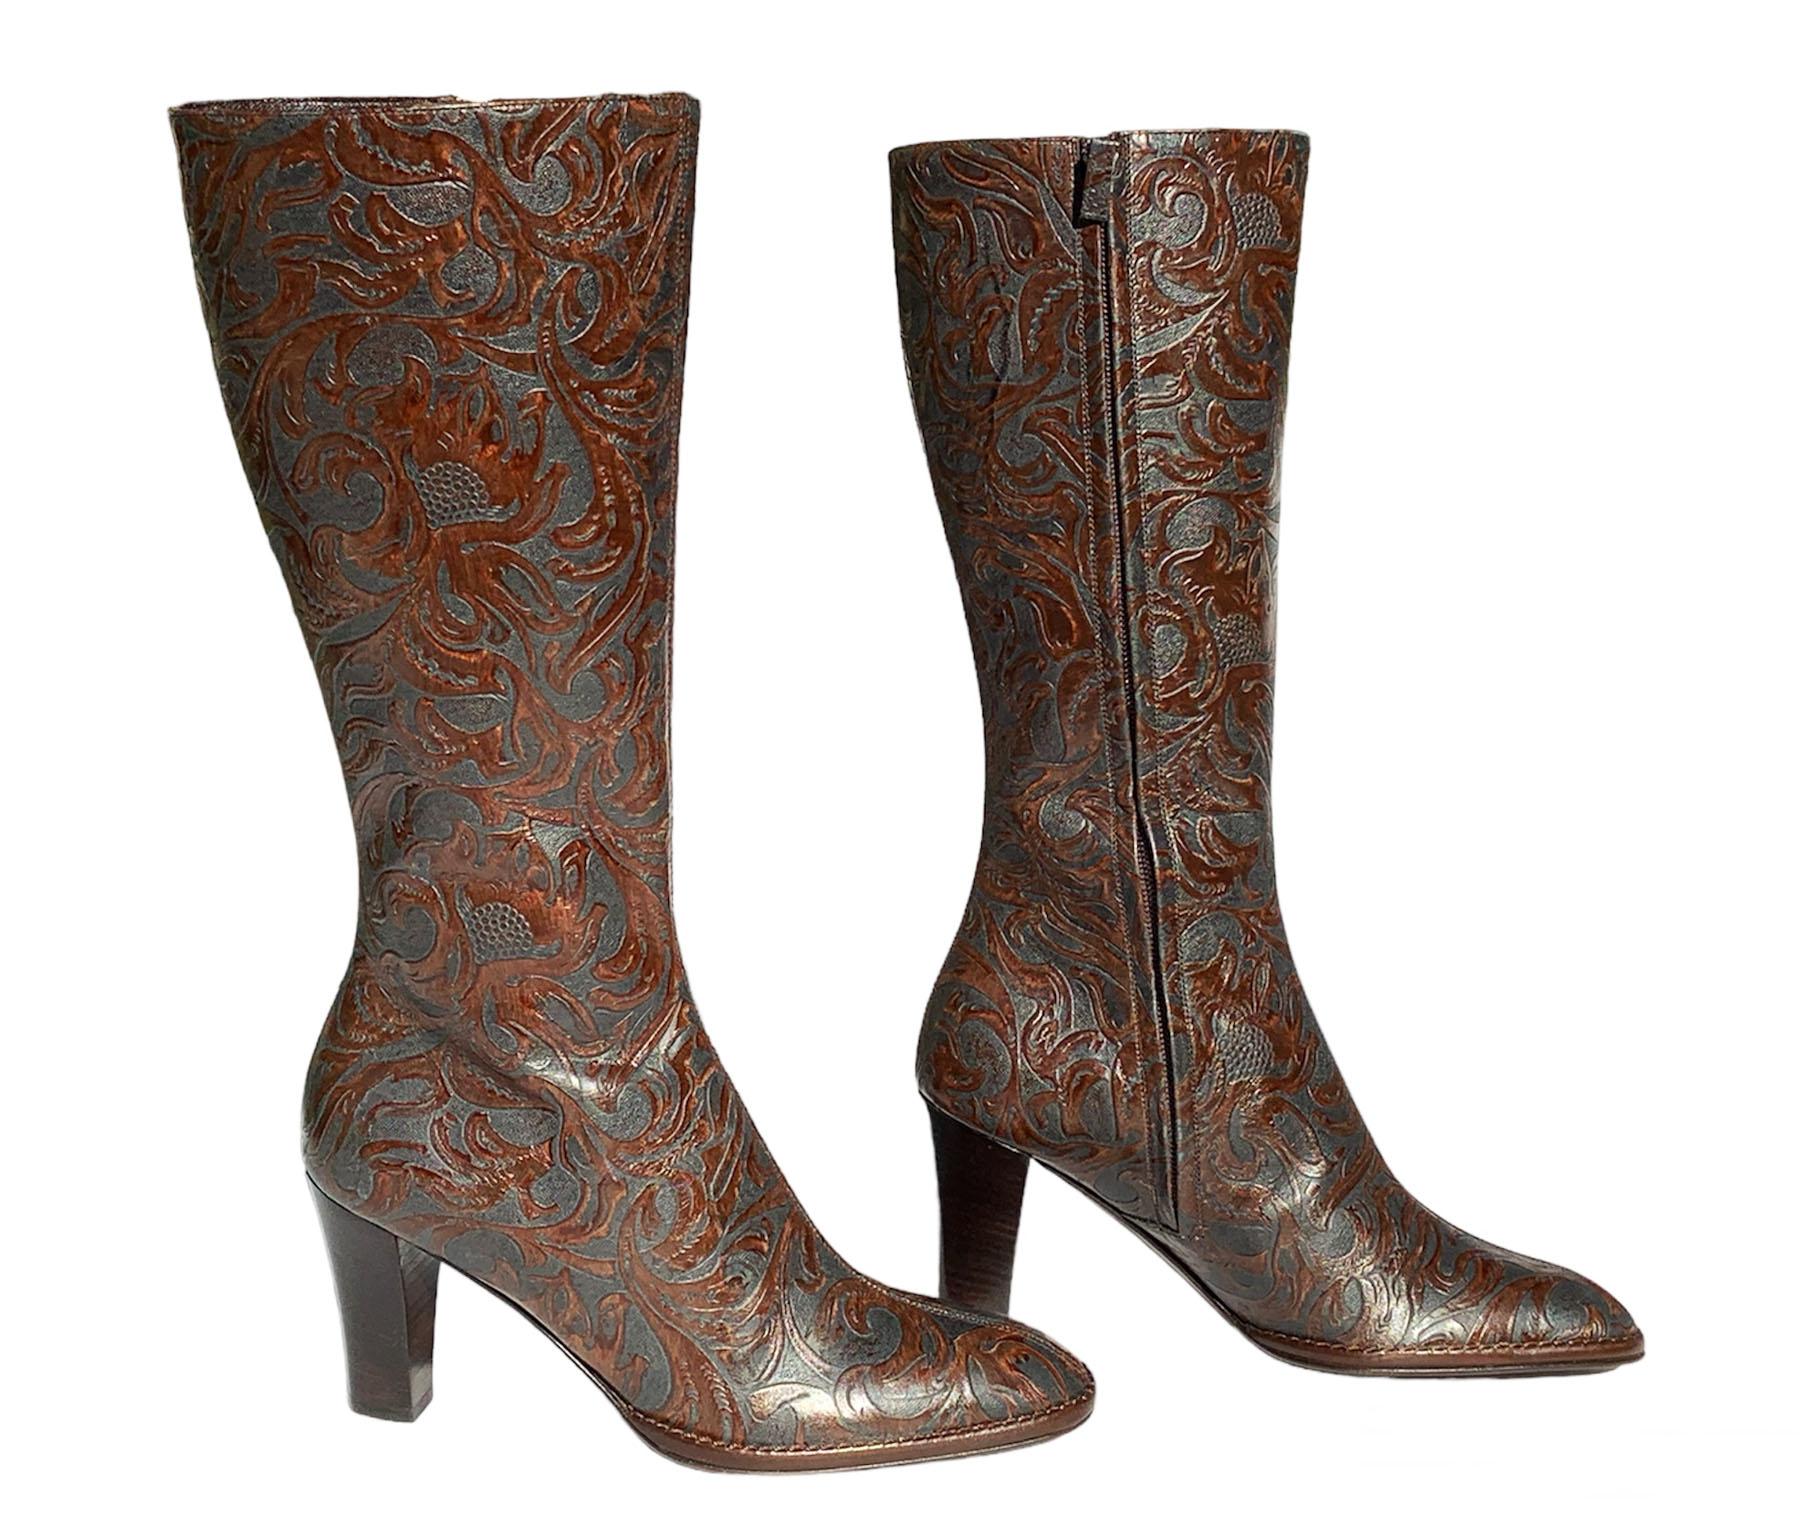 NWT Oscar de la Renta Leather Knee Boots
Italian size 37
Brown Floral tooled over the they gray color make this boots very unique.
Hand welted, Stacked heel, Side zip closure.
Shaft height - 15 inches, Calf circumference - 12.75